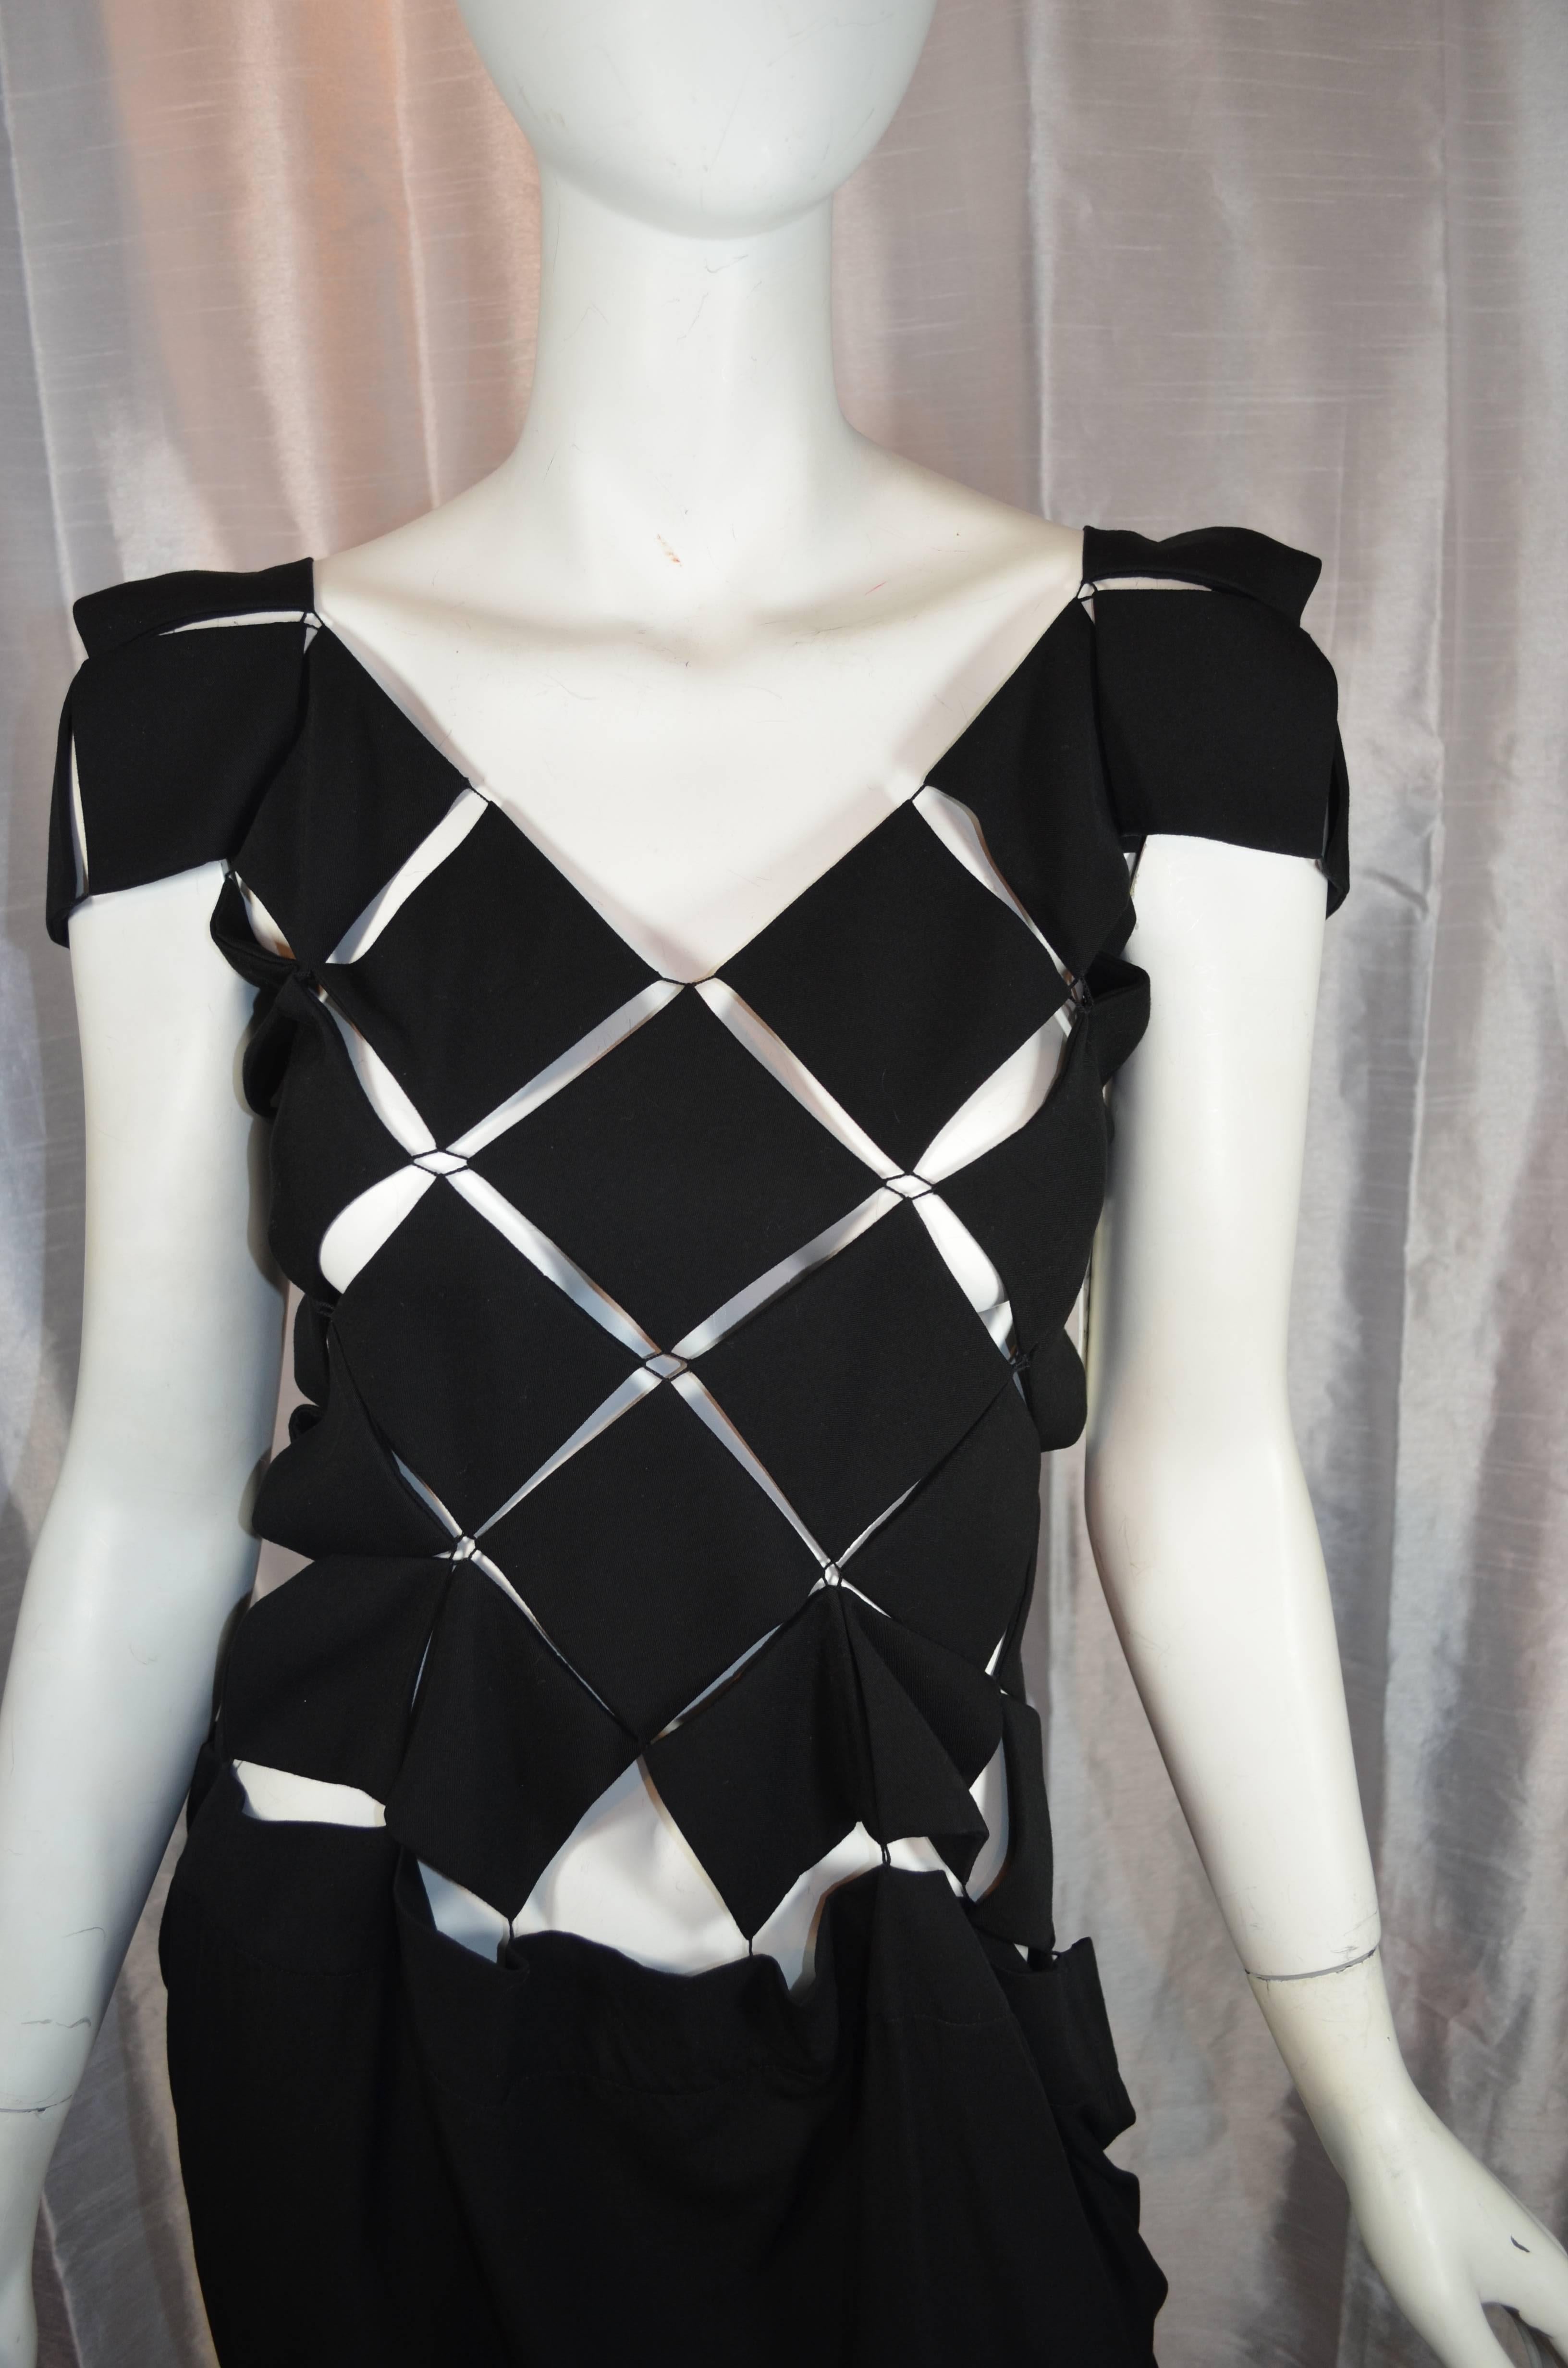 Rare Yohji Yamamoto Dress

Bodice is comprised of diamond panels stitched together at corners. Skirt is unstructured and suspended from corners of diamond panels. Jewelry clasp closures in the back. Excellent condition.

Size 1. 100%